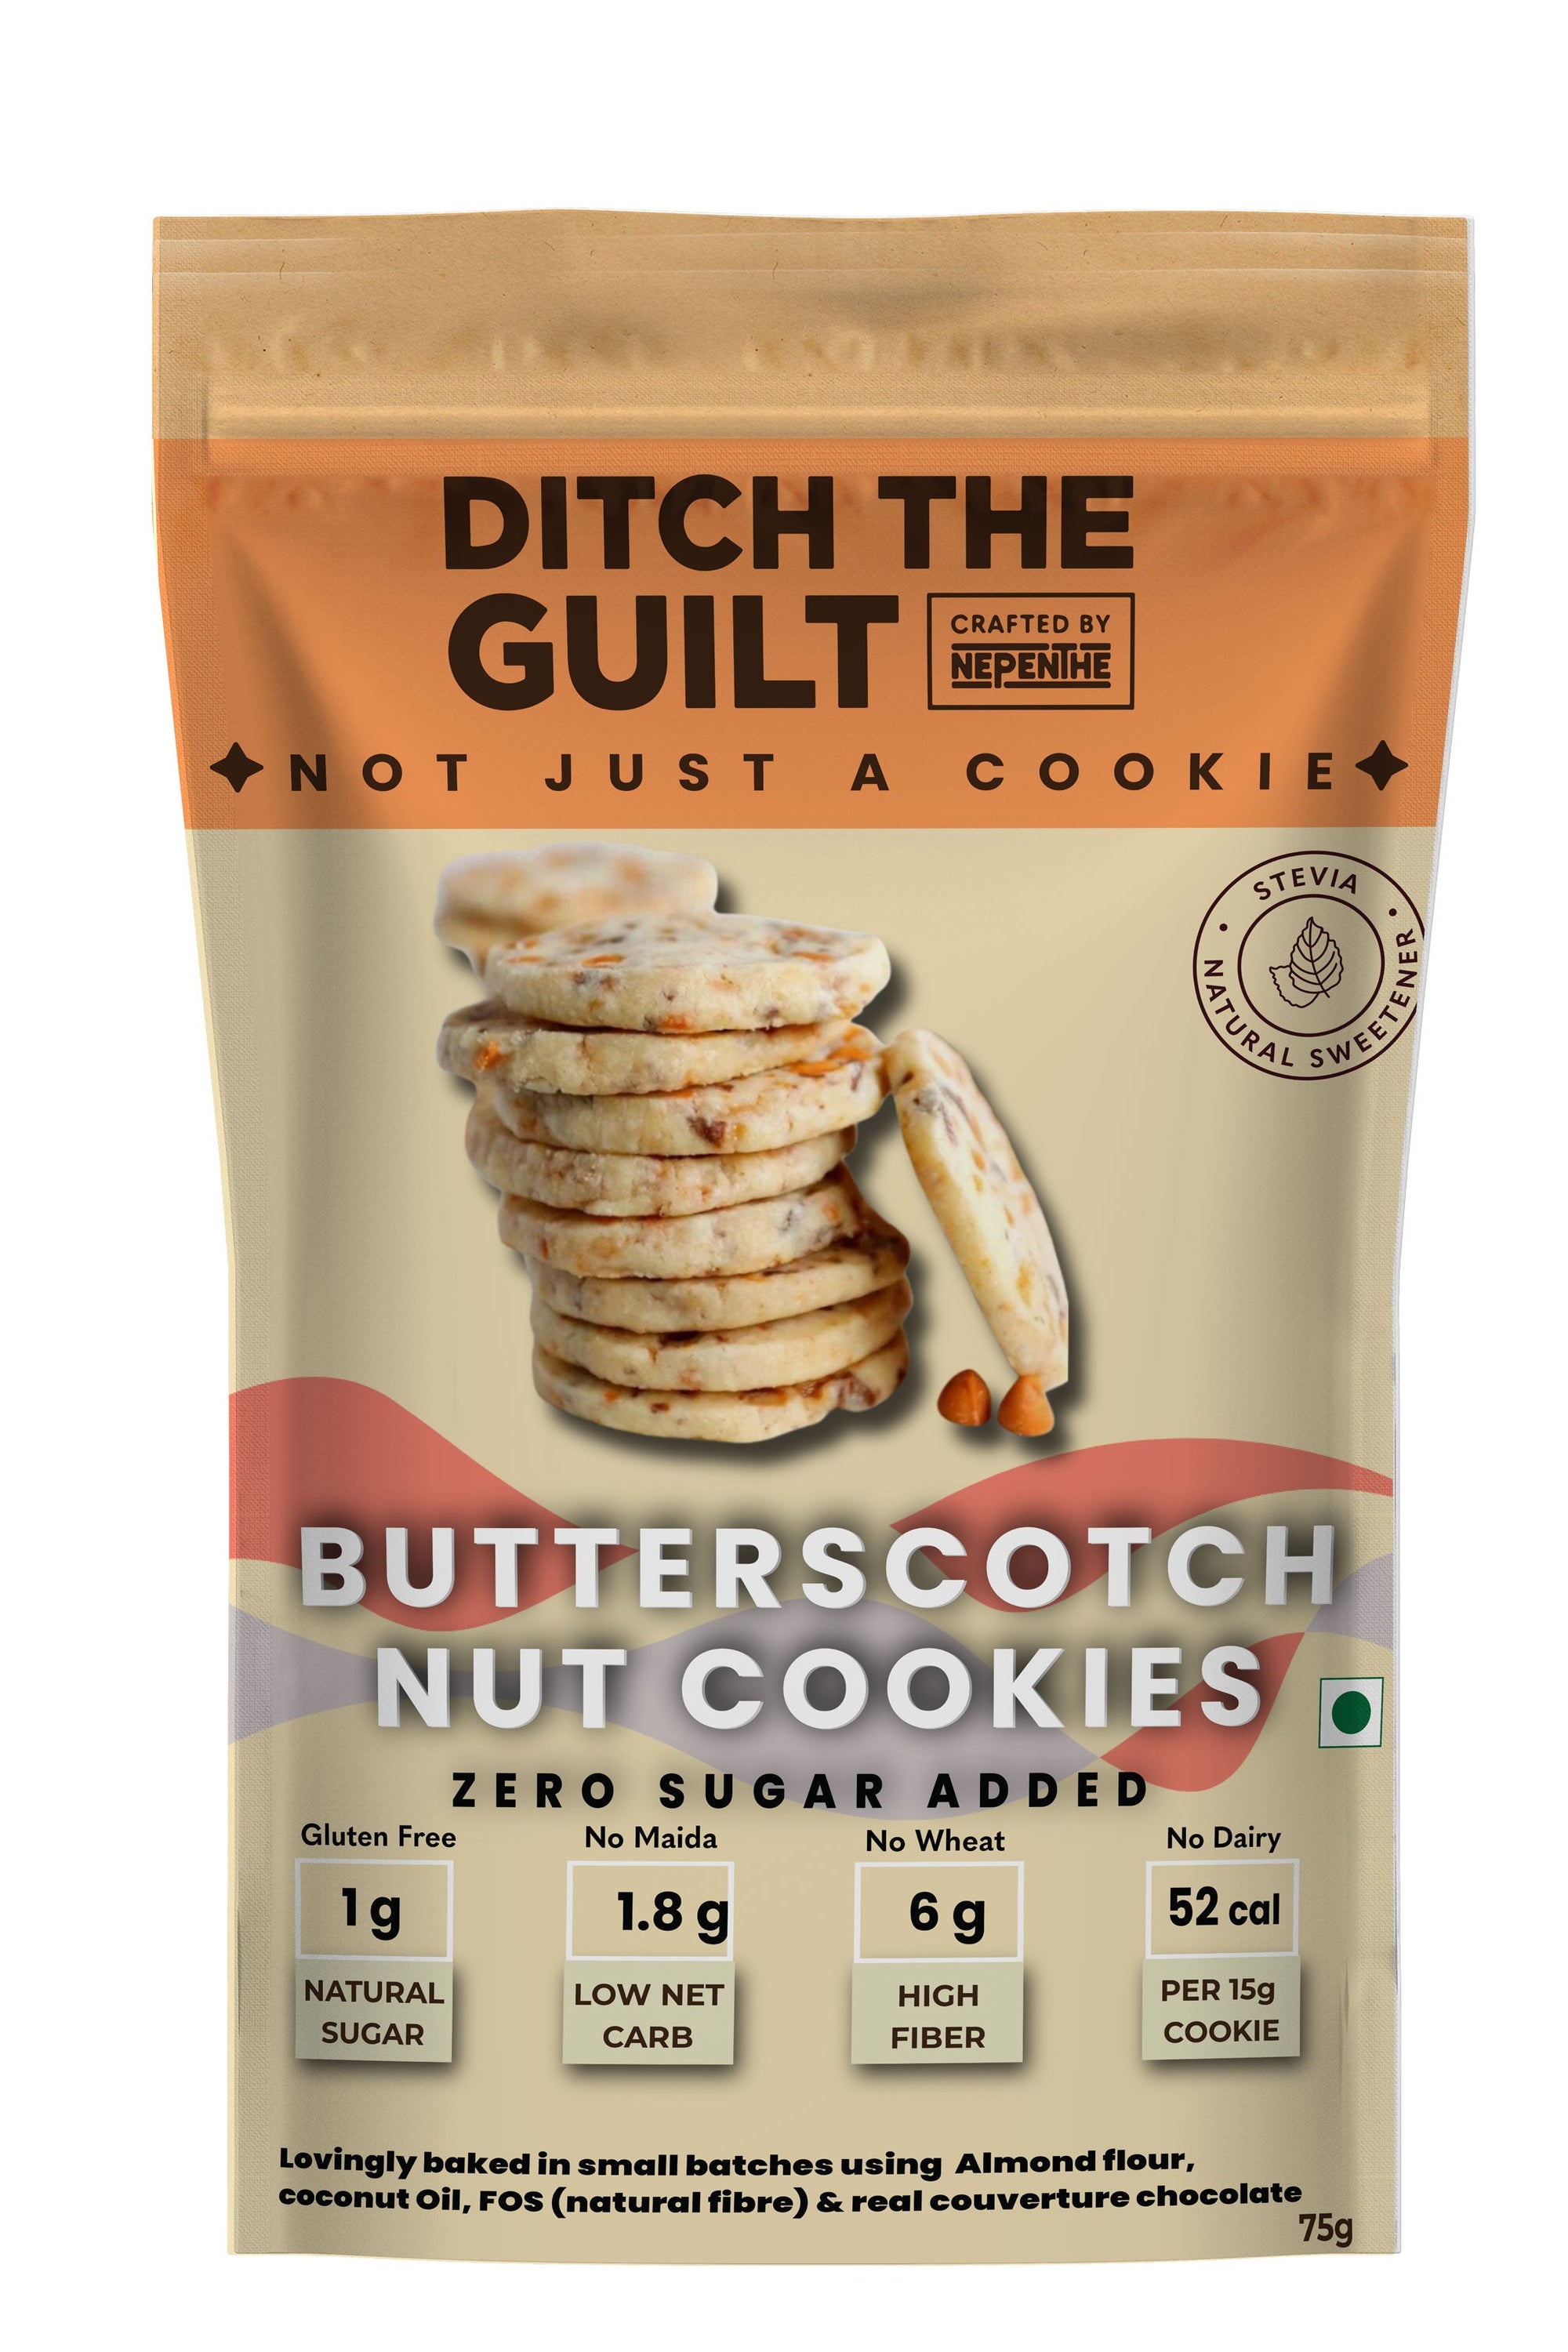 Butterscotch Nut Cookie (15g x 6 Cookies) - Almond Flour & Chocolate - Sugar Free Cookies - Gluten Free - Stevia Sweetened - Lower Calories than Regular Cookies with Sugar - Low Net Carbs - 75g Pack